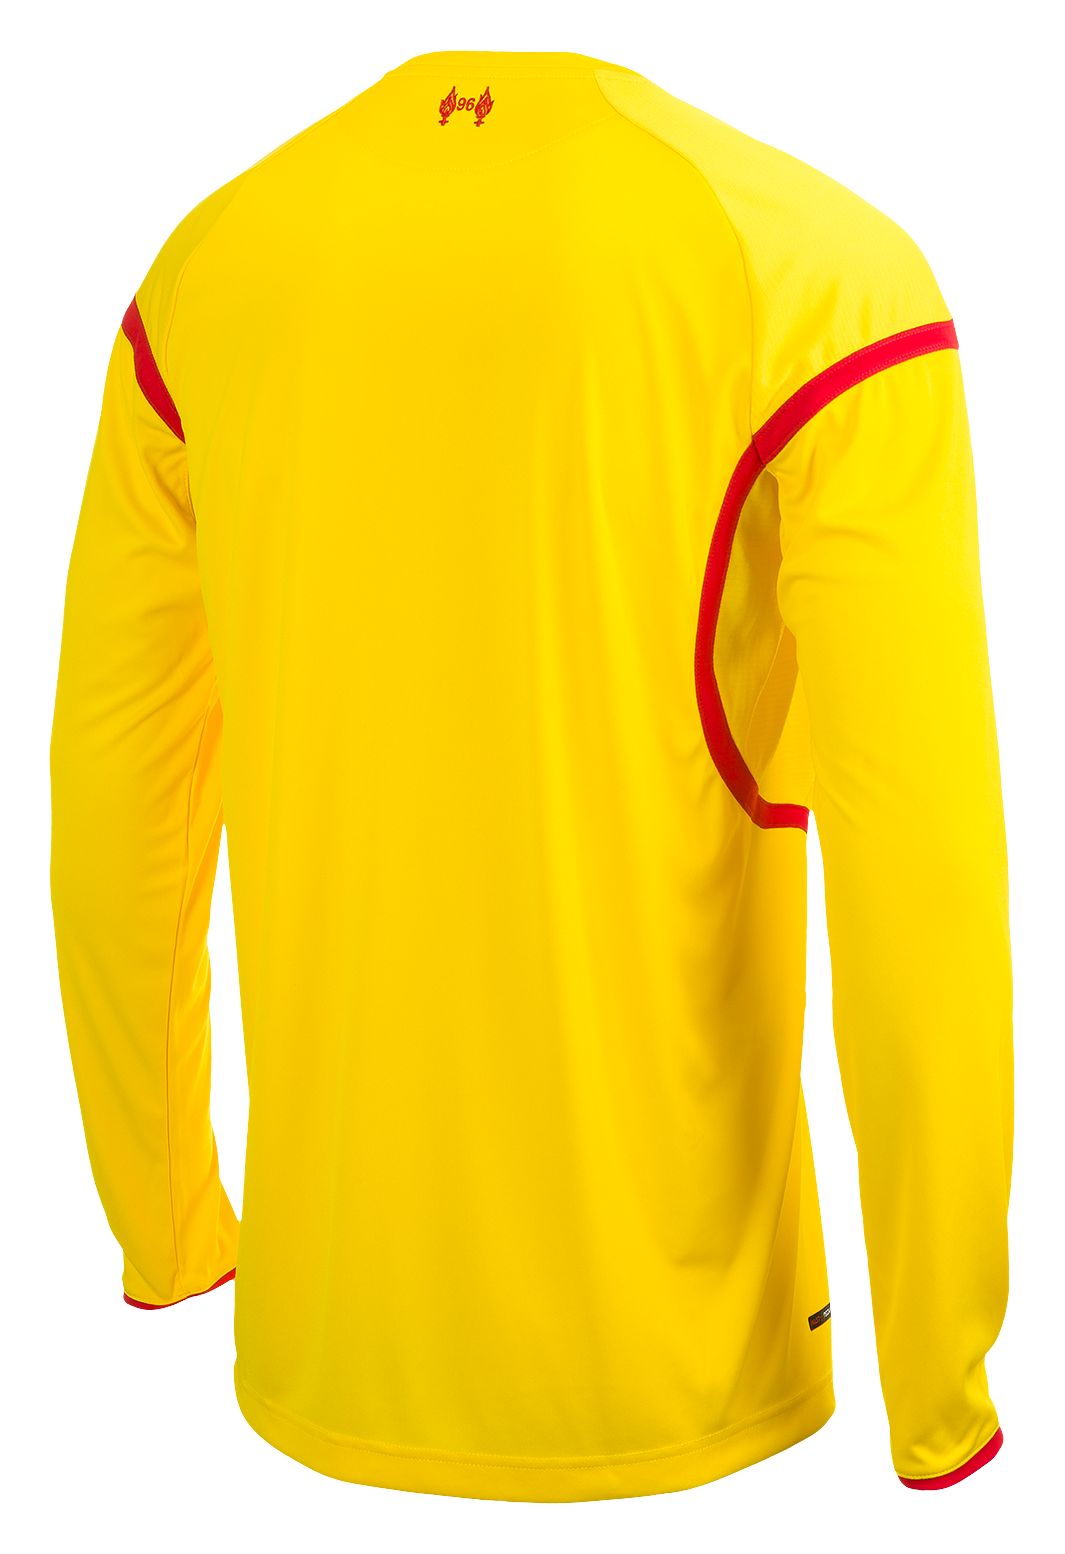 Liverpool Away Long Sleeve Jersey 2014/15, Cyber Yellow with High Risk Red image number 0